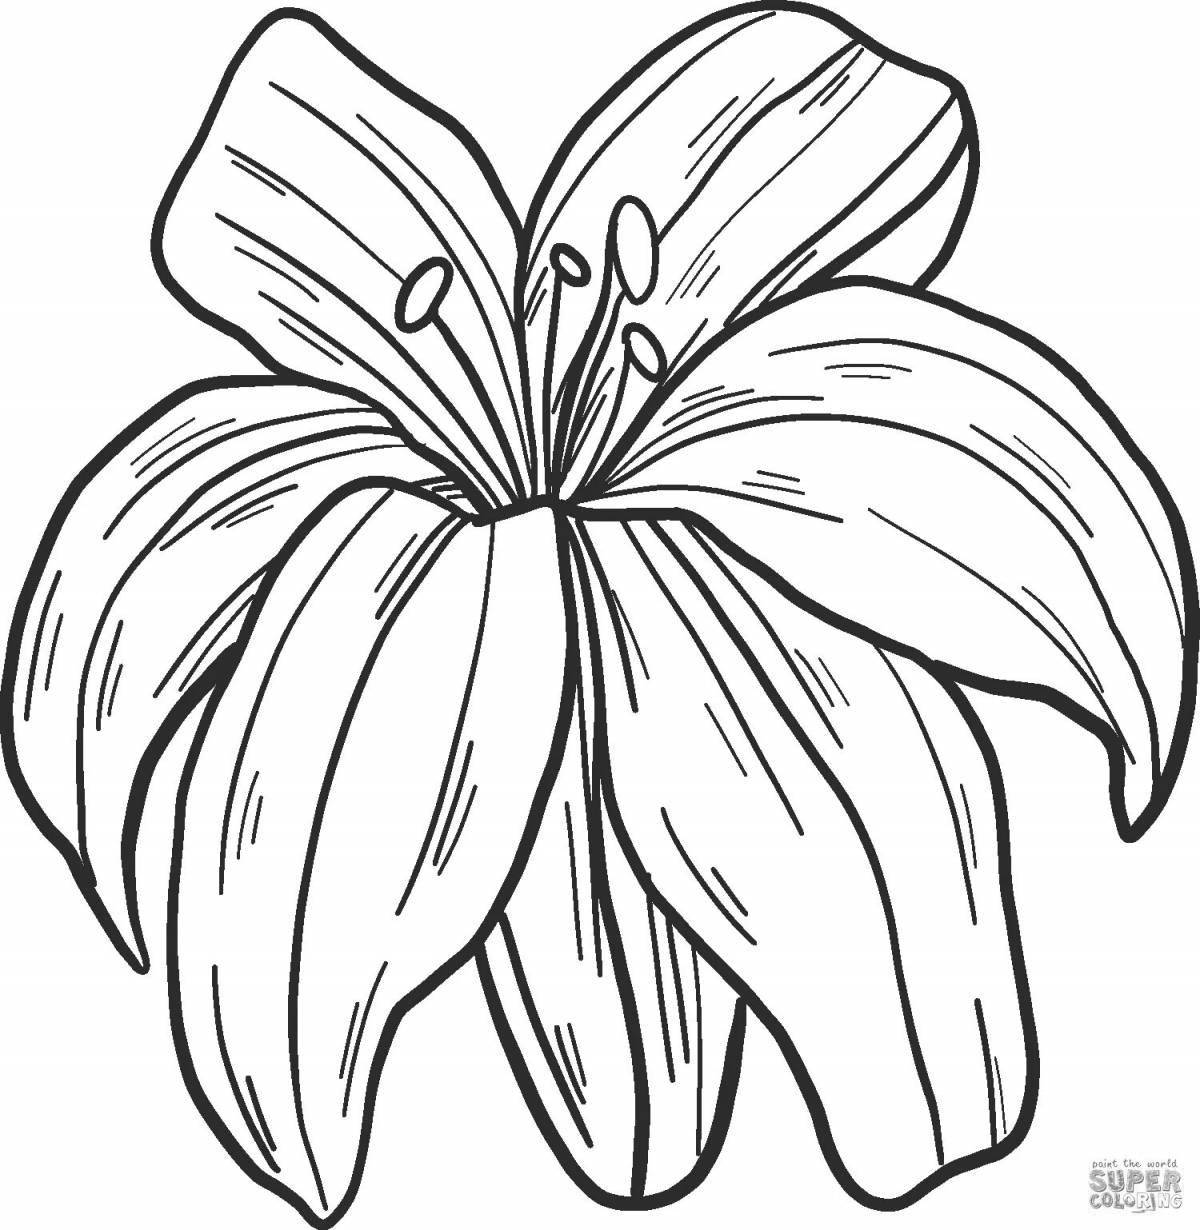 Adorable lily coloring pages